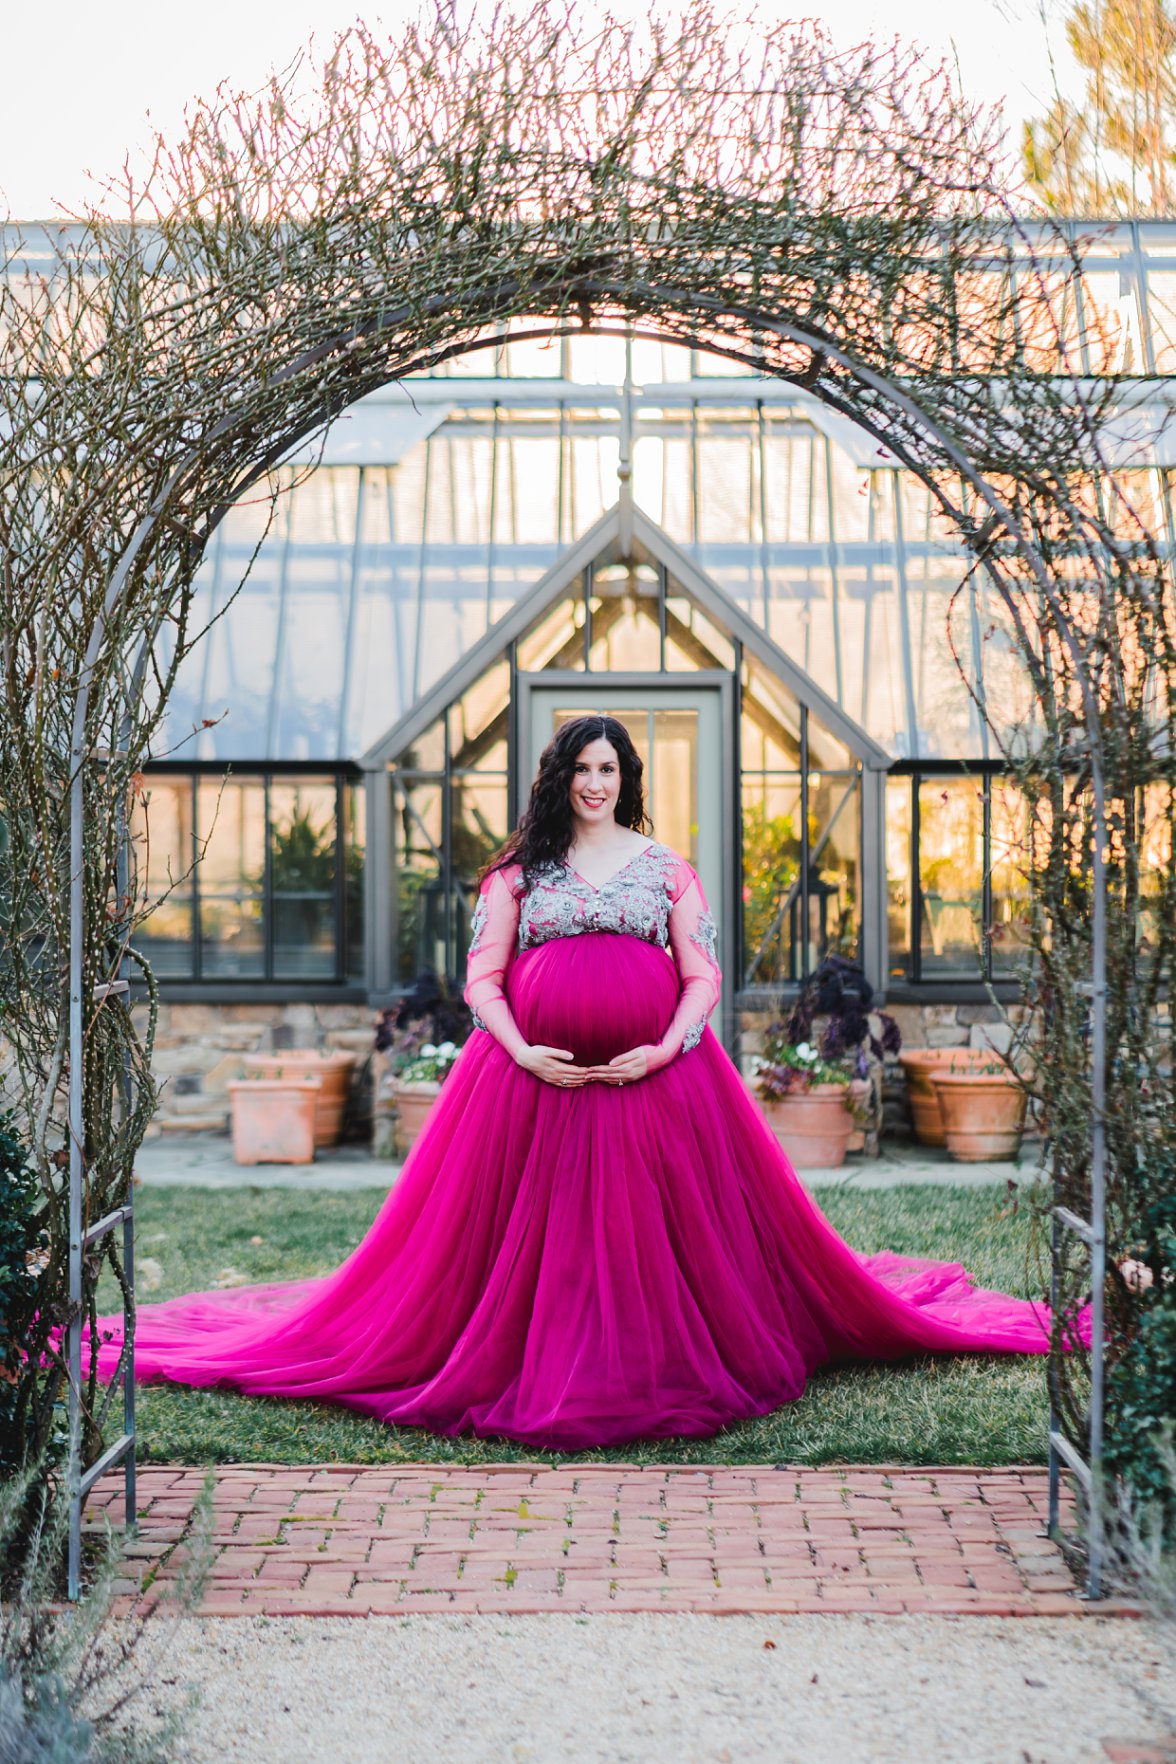 Woman in maternity gown in a garden 